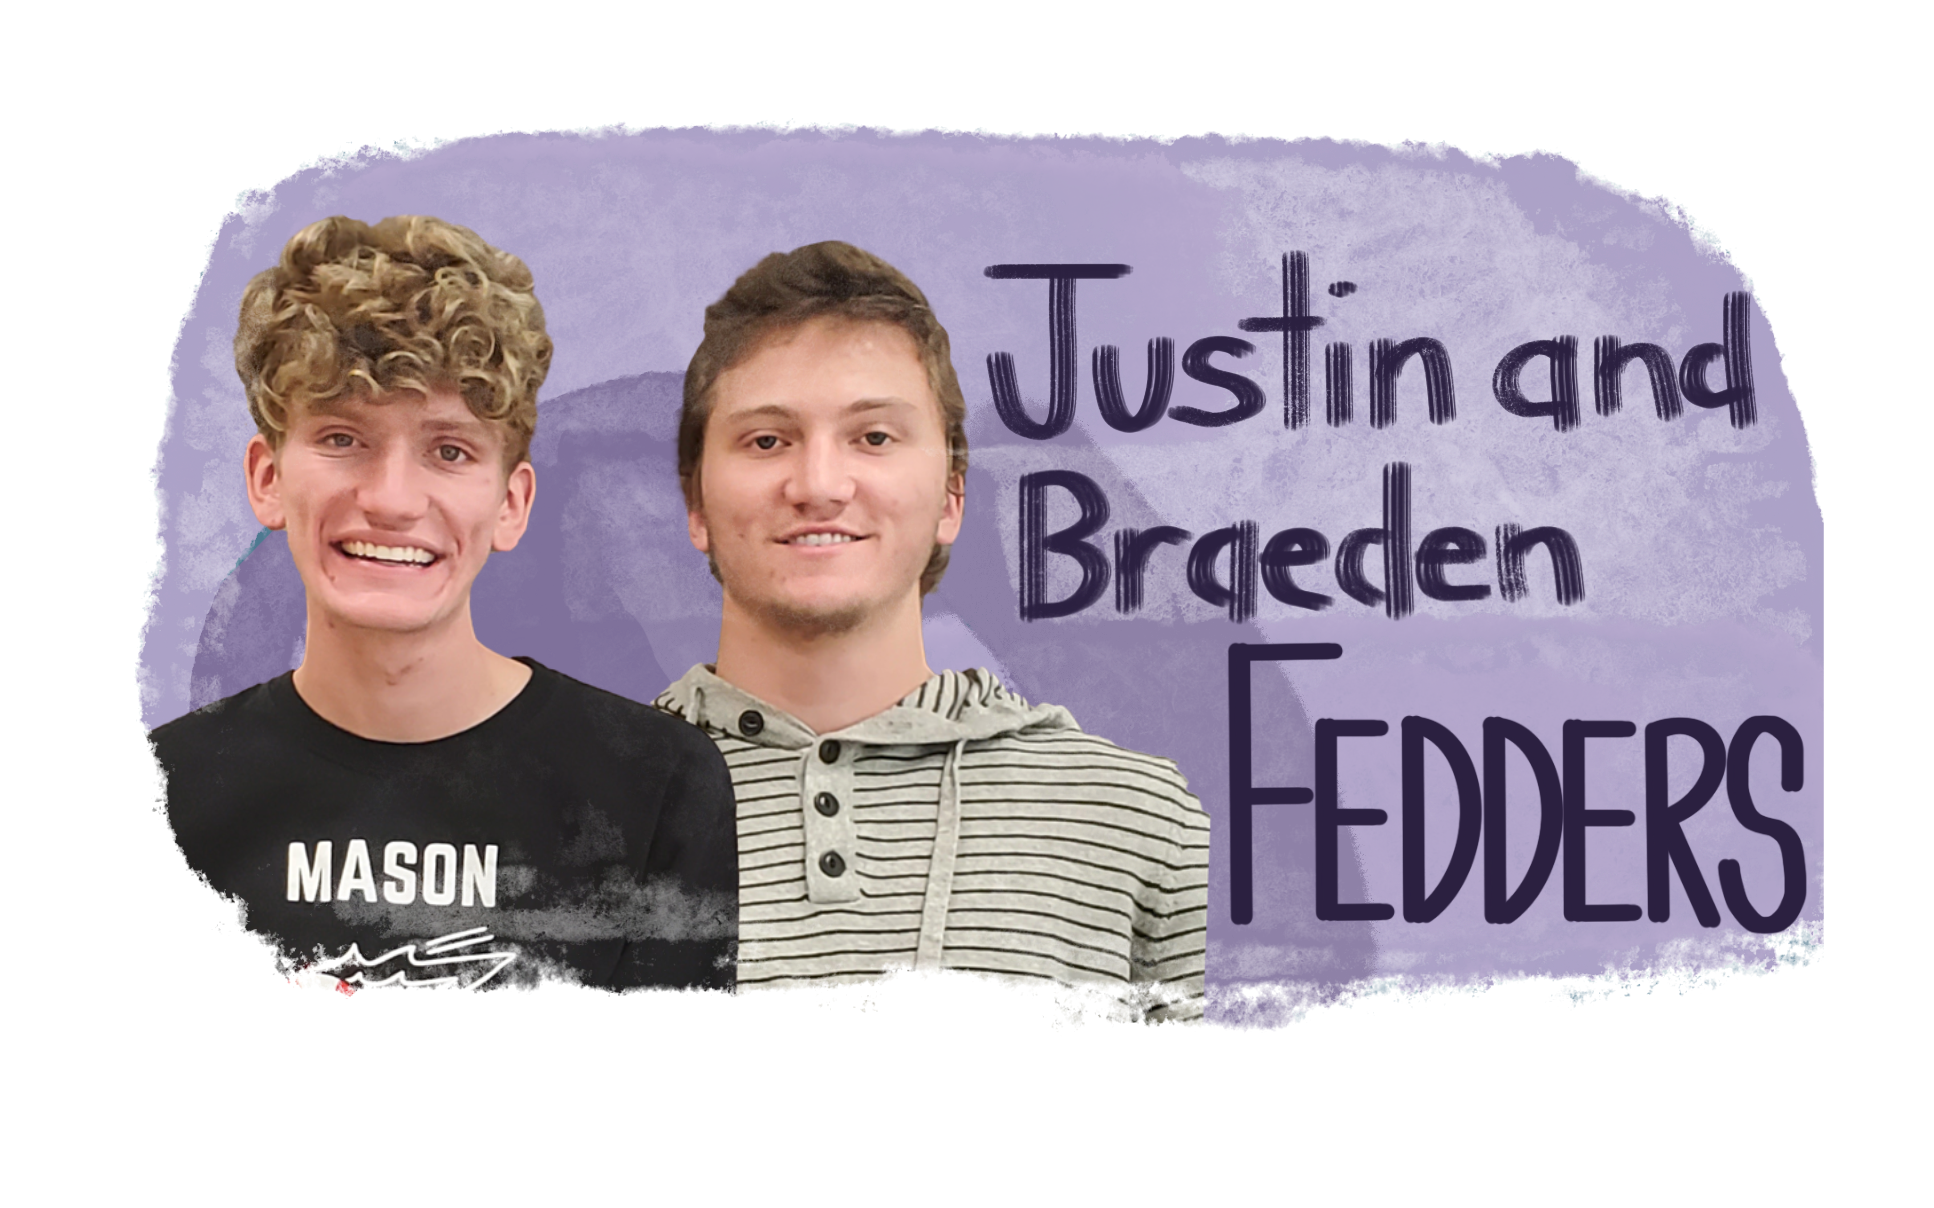 Twins Justin and Braeden Fedders